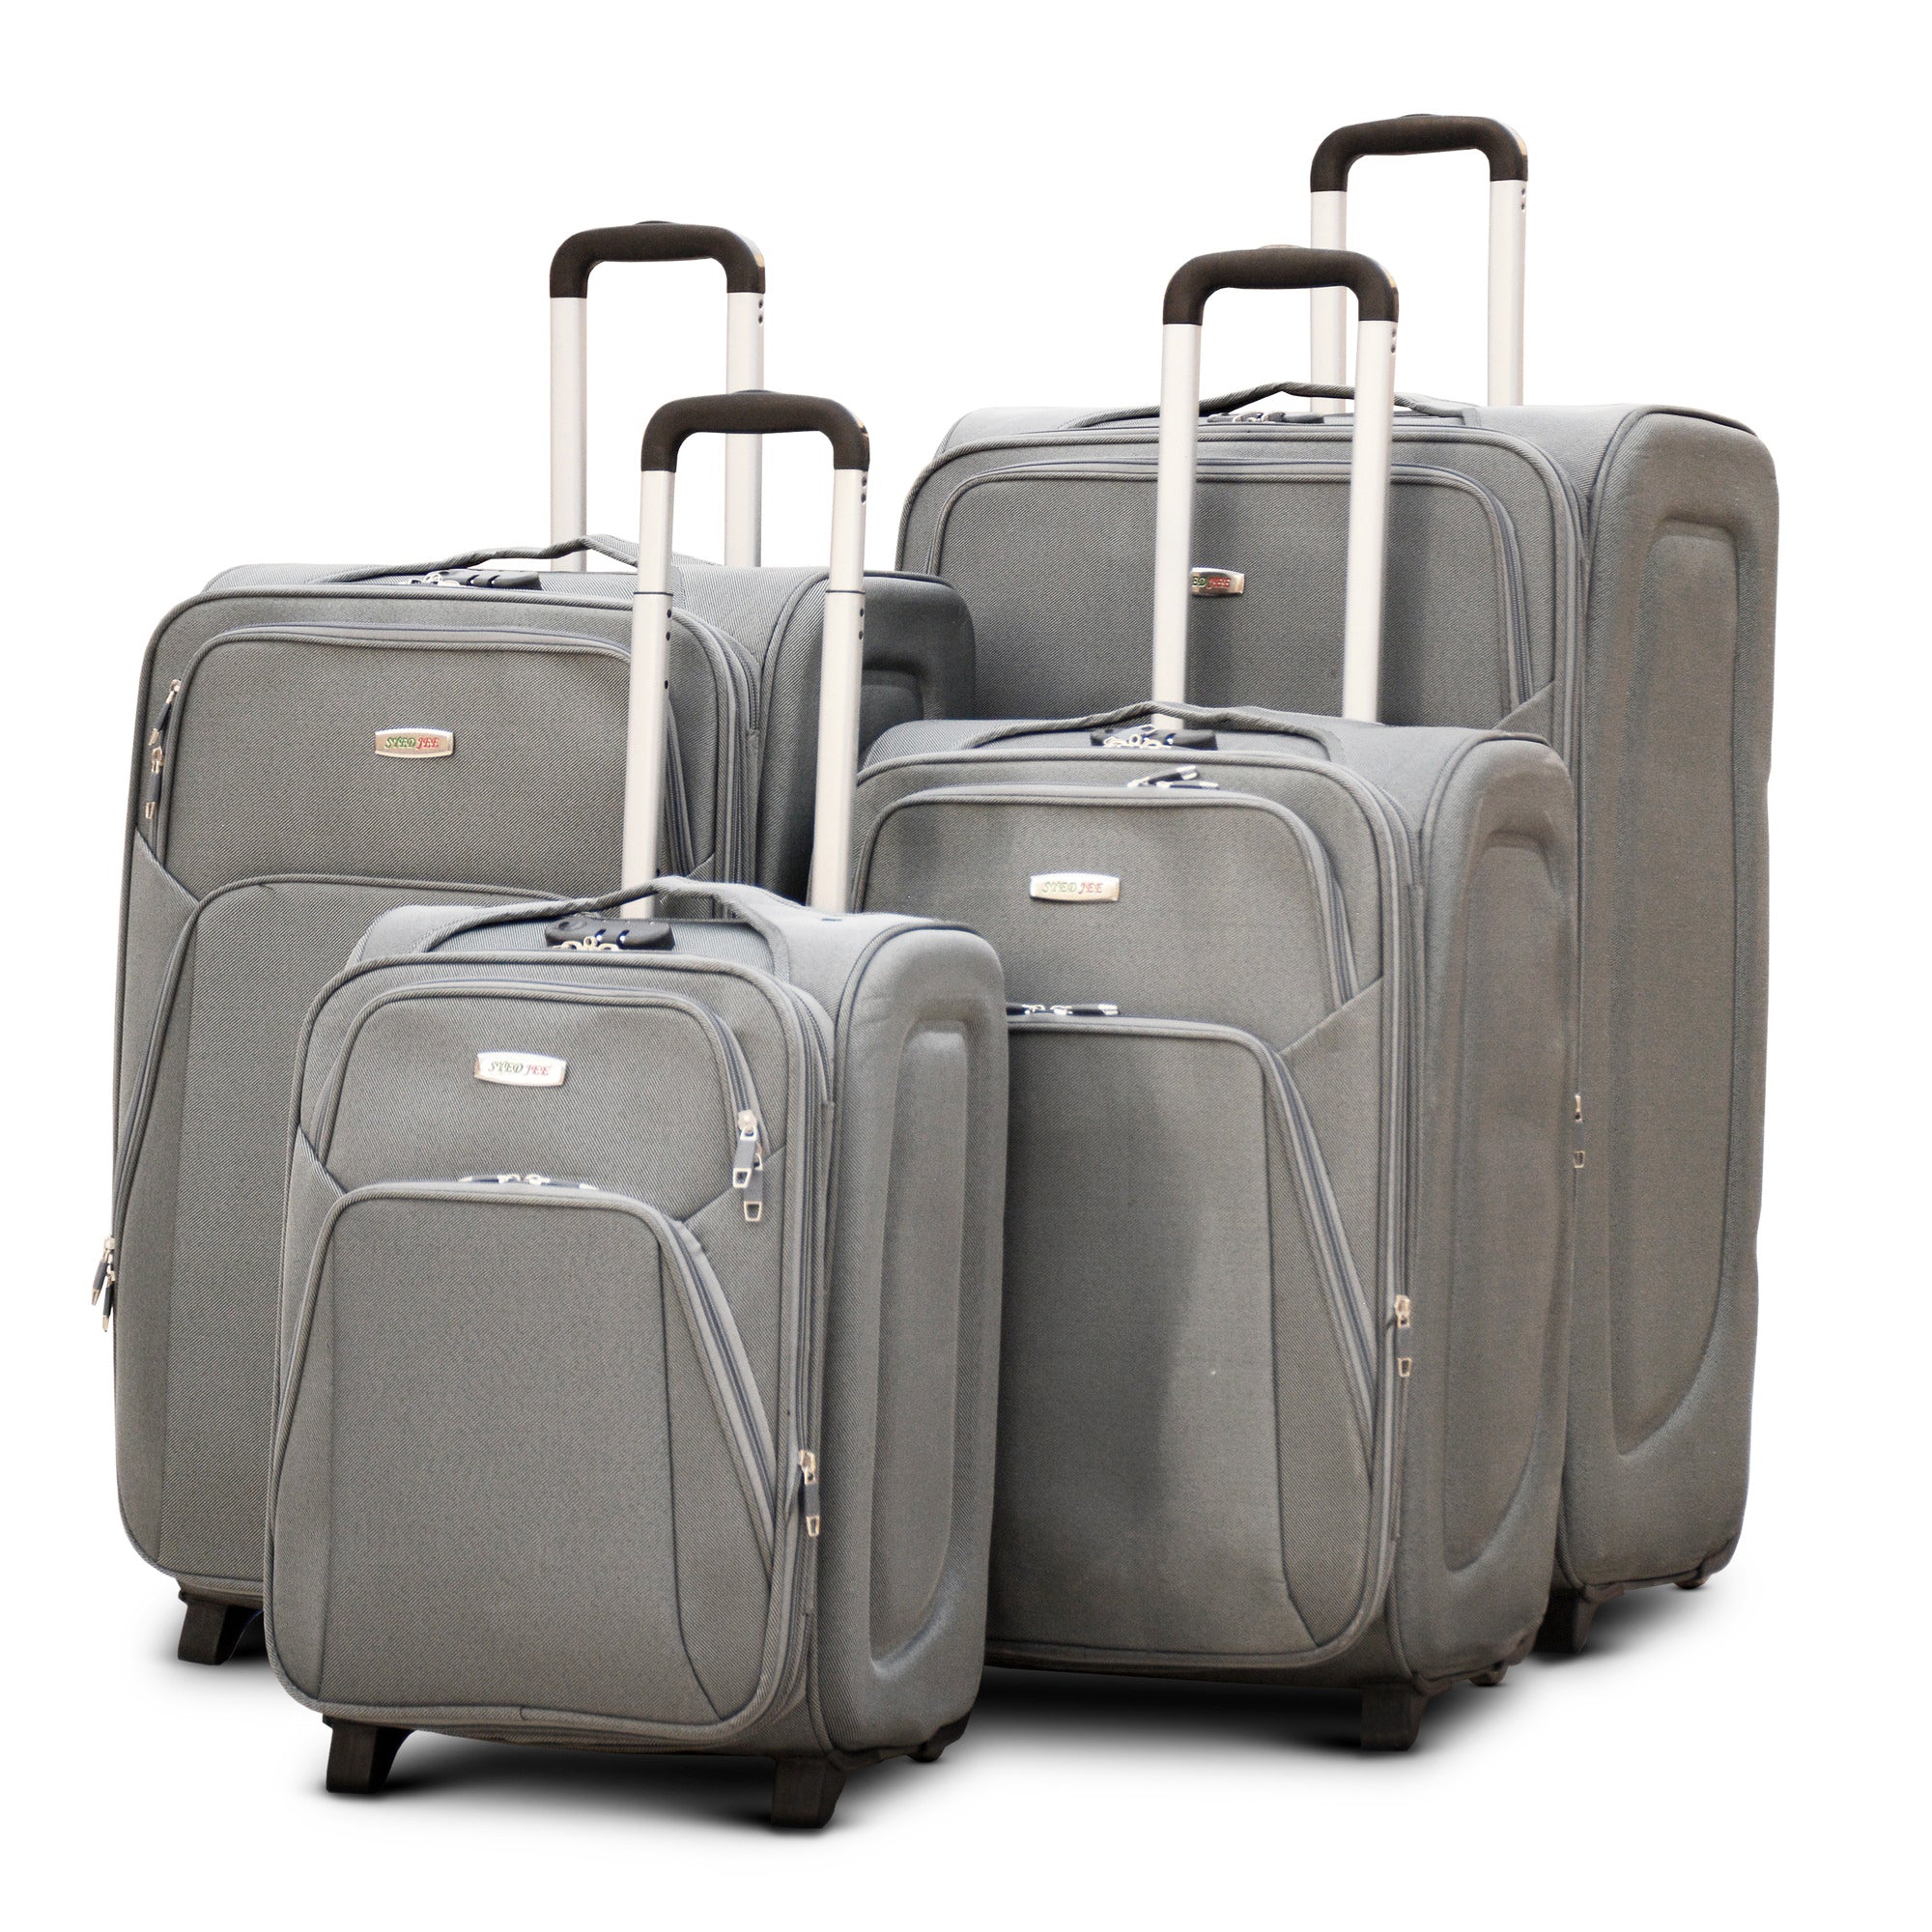 4 Pcs Set 20” 24” 28" 32 Inches Jian Grey 2 Wheels Soft Material Luggage | Soft Shell Lightweight | 2 Years Warranty